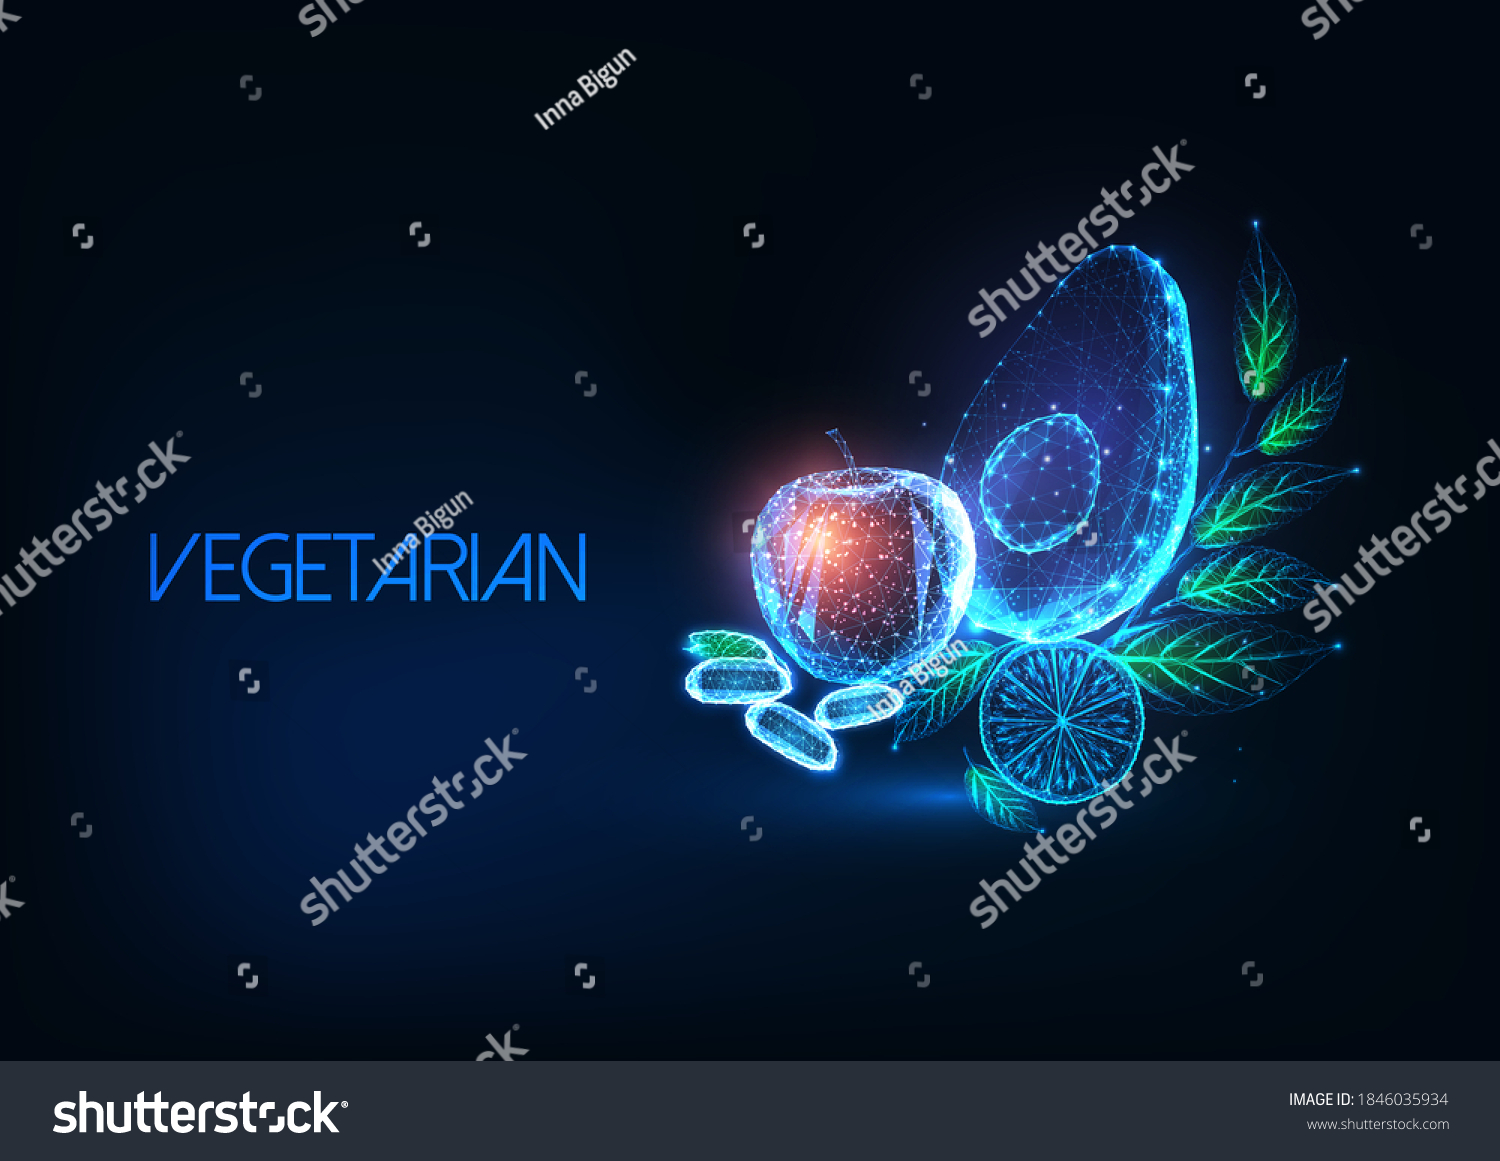 Futuristic vegetarian or vegan diet concept with glowing low polygonal avocado, apple, lemon, beans and greens on dark blue background. Modern wireframe mesh design vector illustration. #1846035934